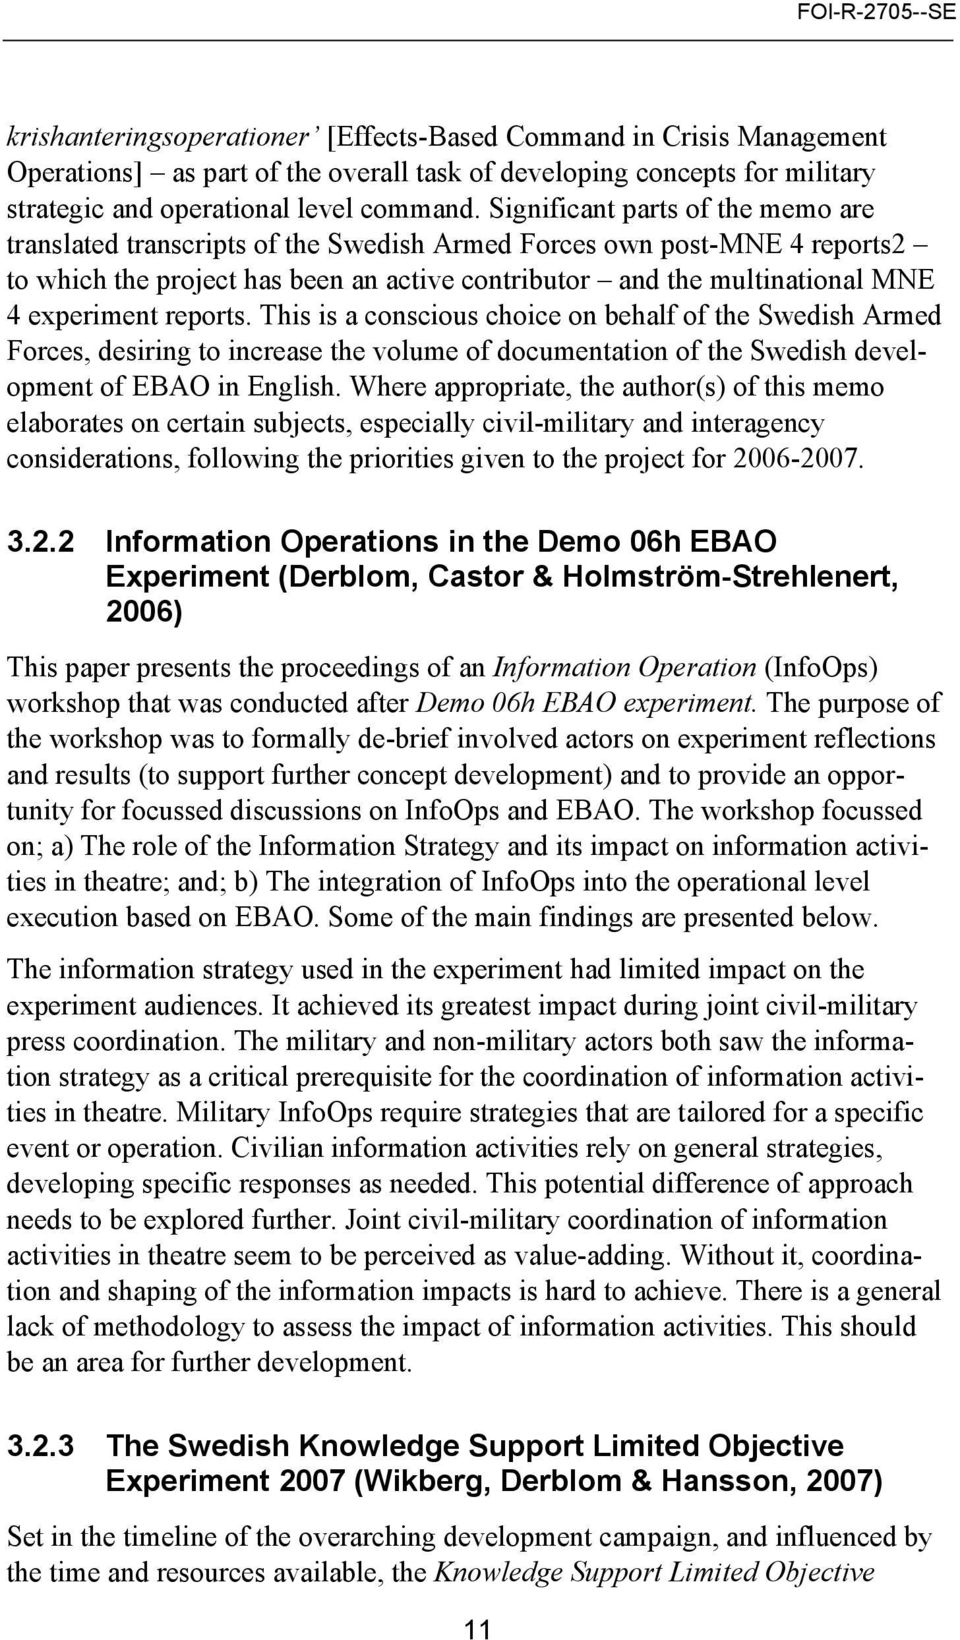 reports. This is a conscious choice on behalf of the Swedish Armed Forces, desiring to increase the volume of documentation of the Swedish development of EBAO in English.